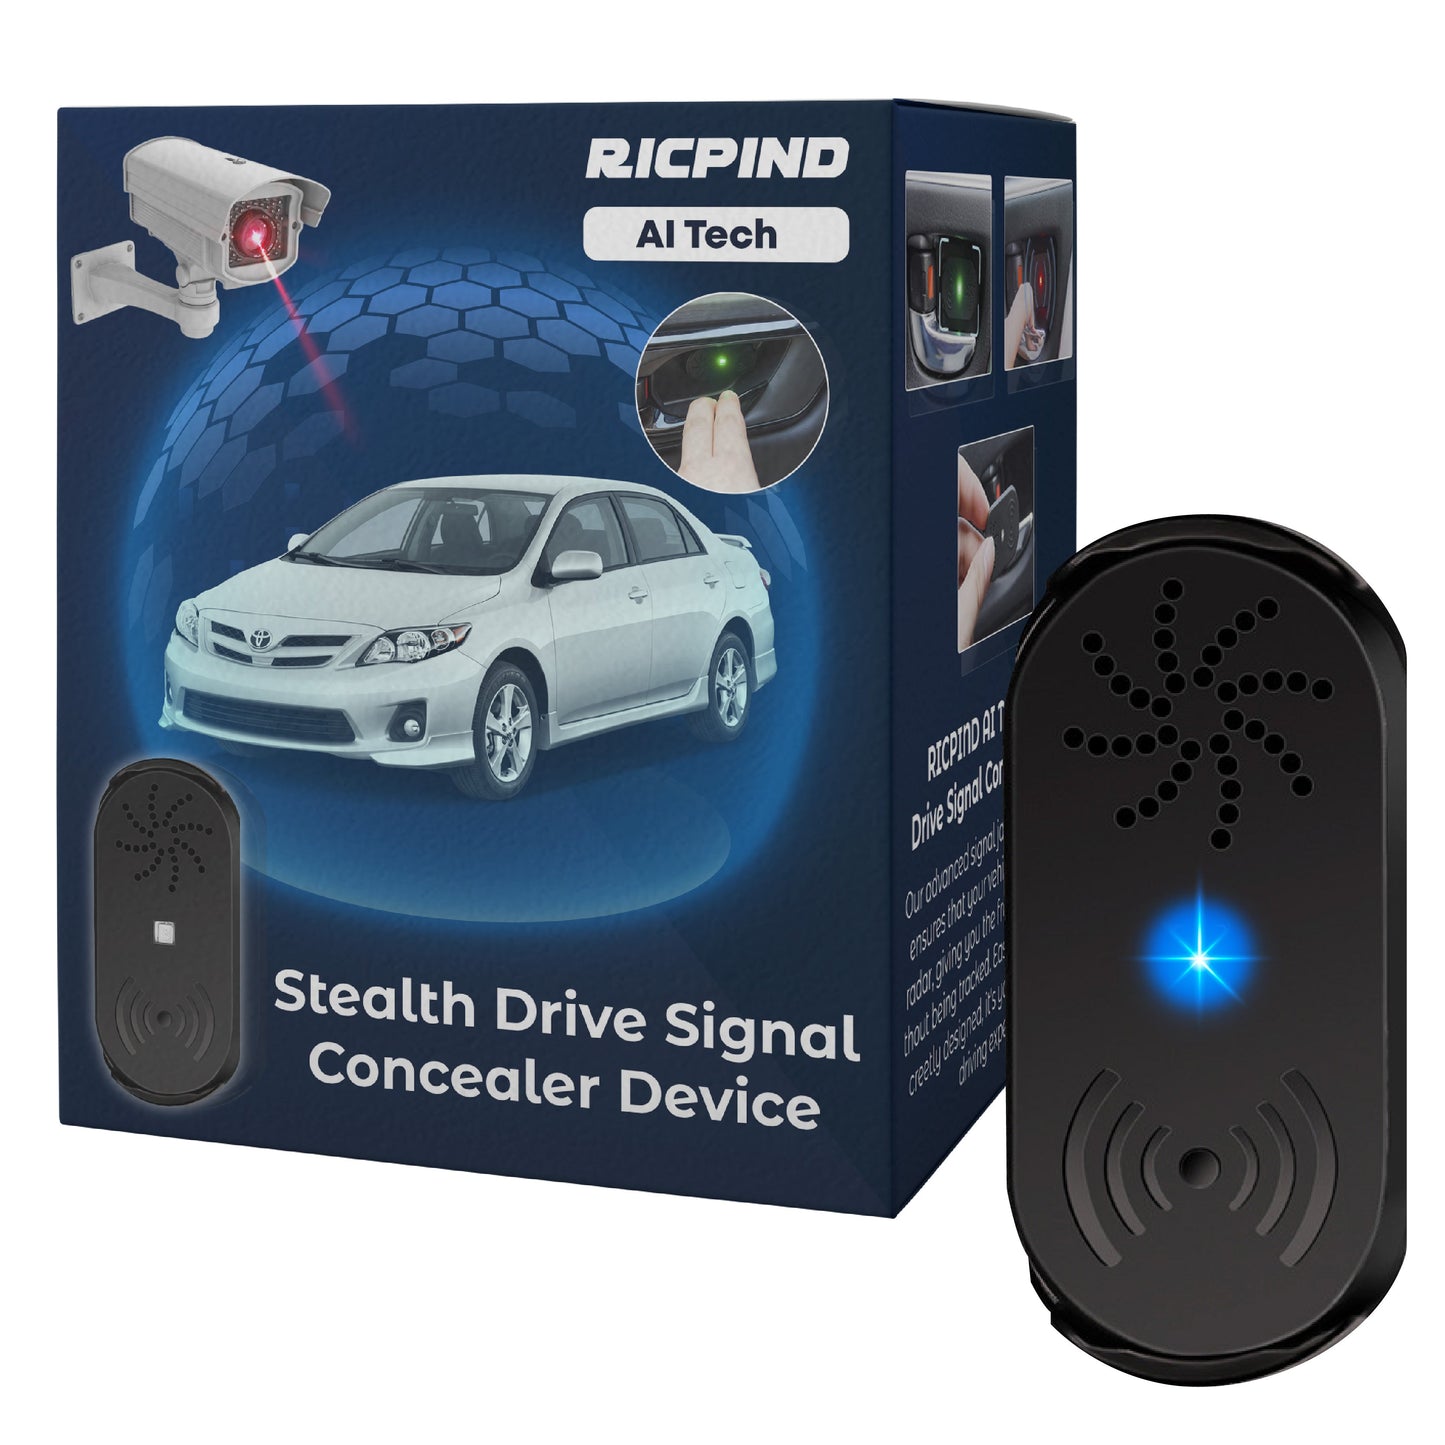 RICPIND 2 AI Tech Stealth Drive Signal Concealer Device